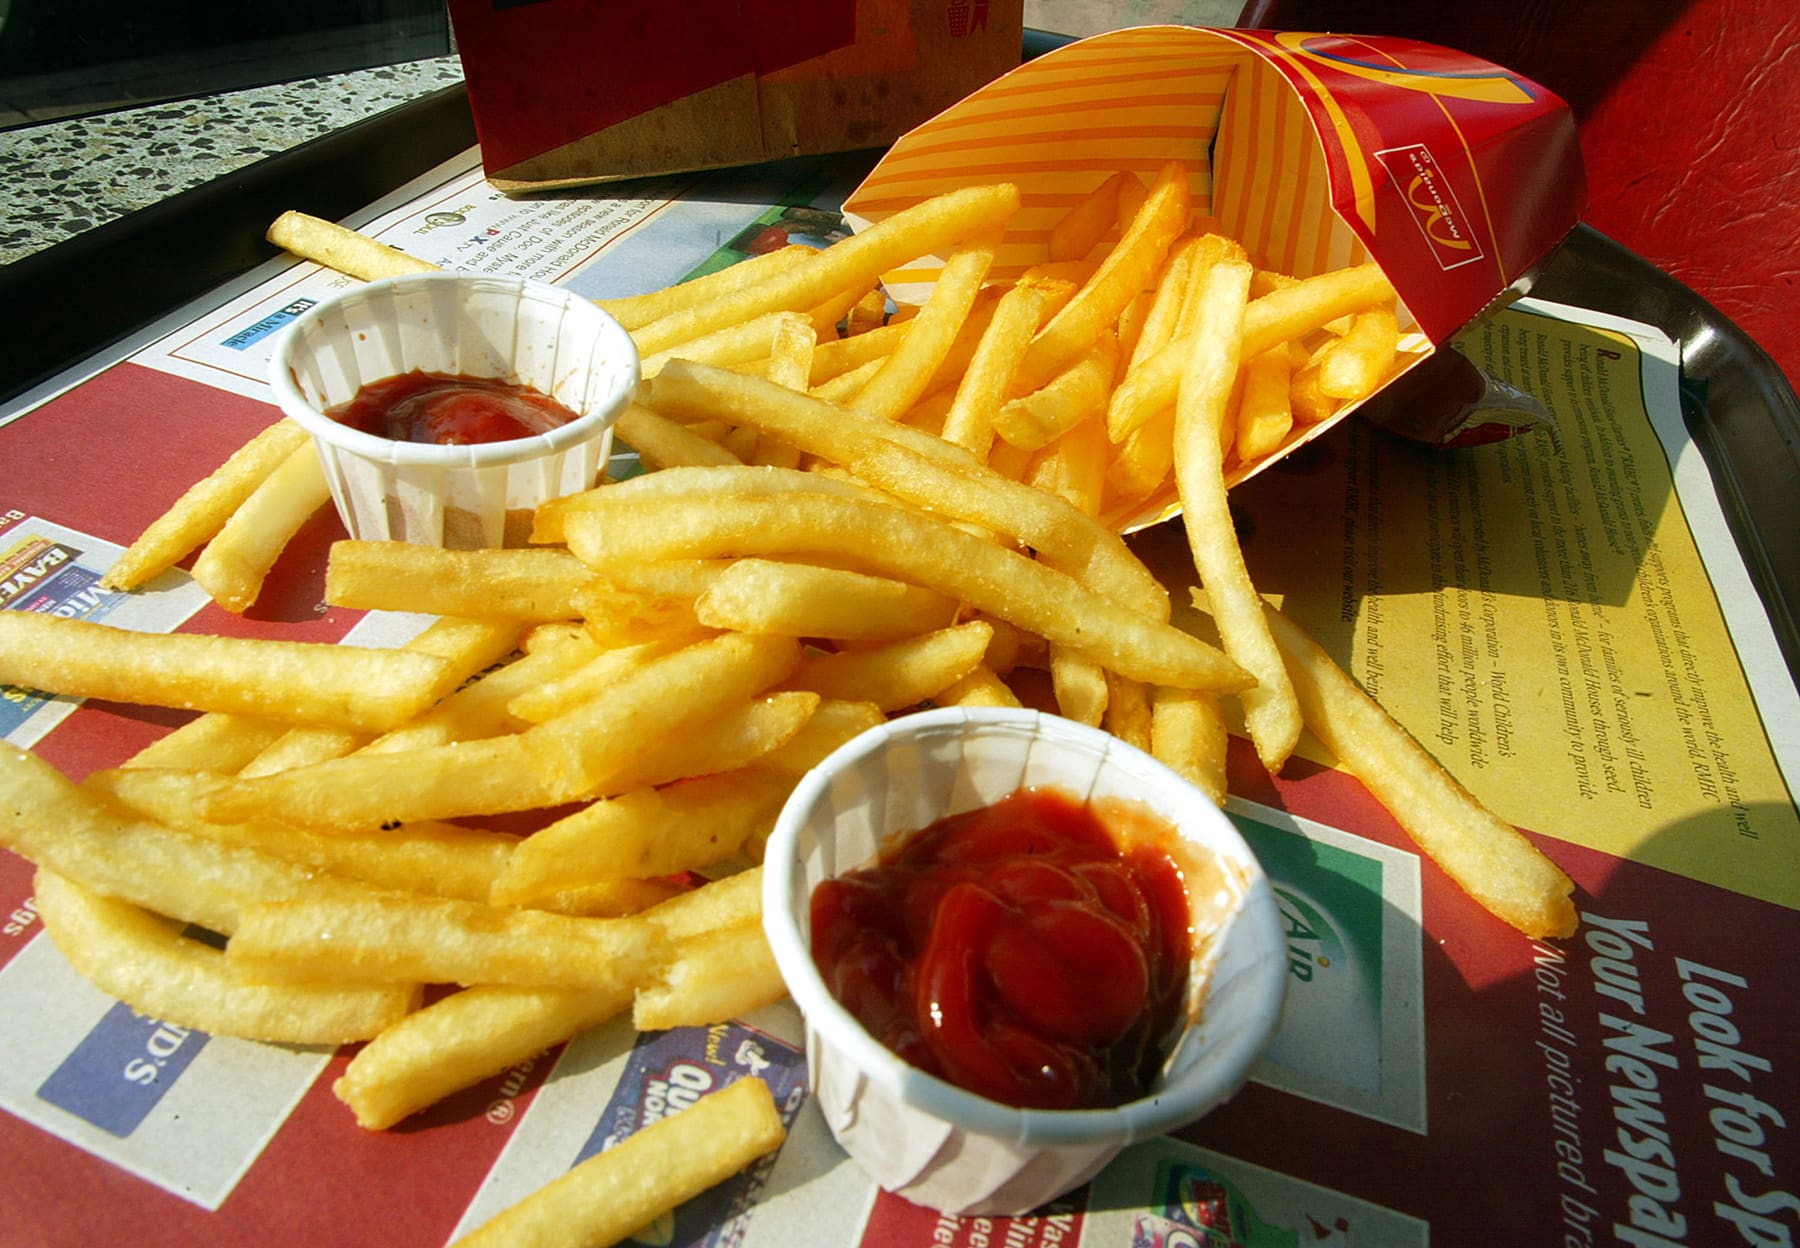 What are McDonald's fries really made of?